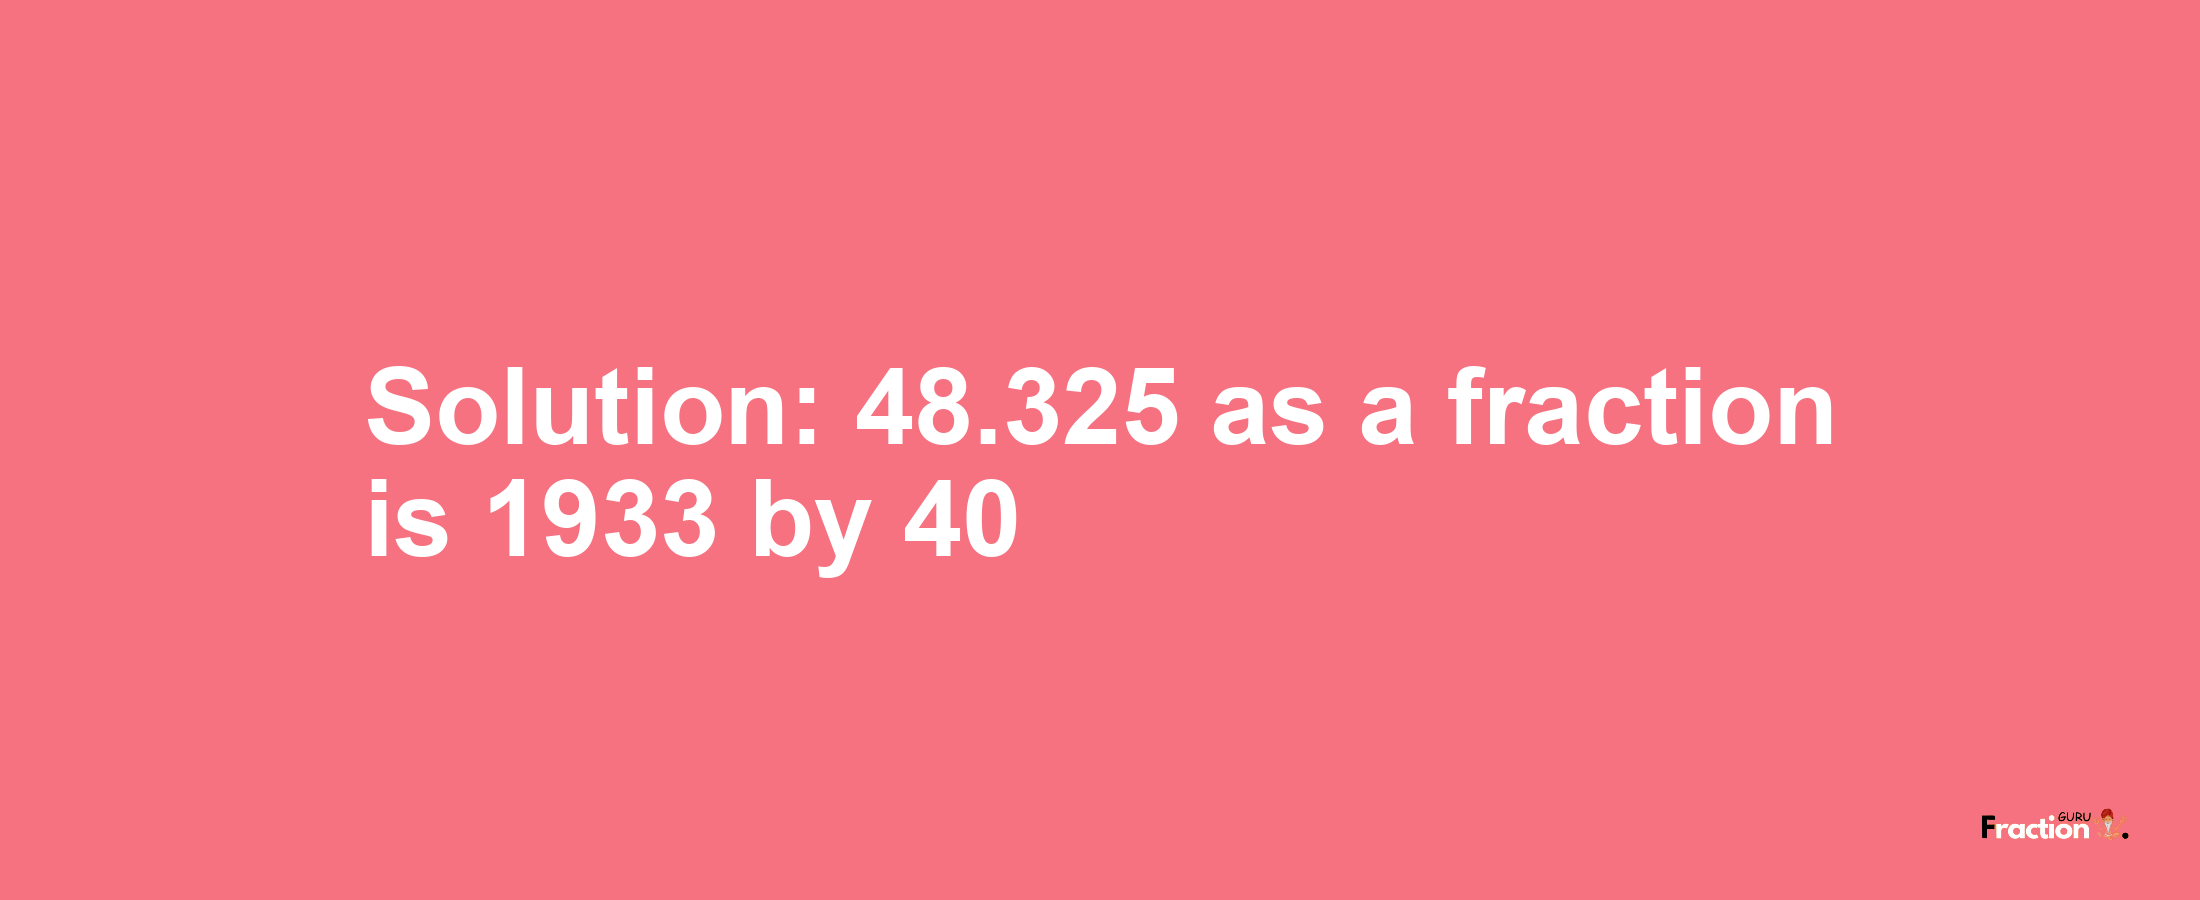 Solution:48.325 as a fraction is 1933/40